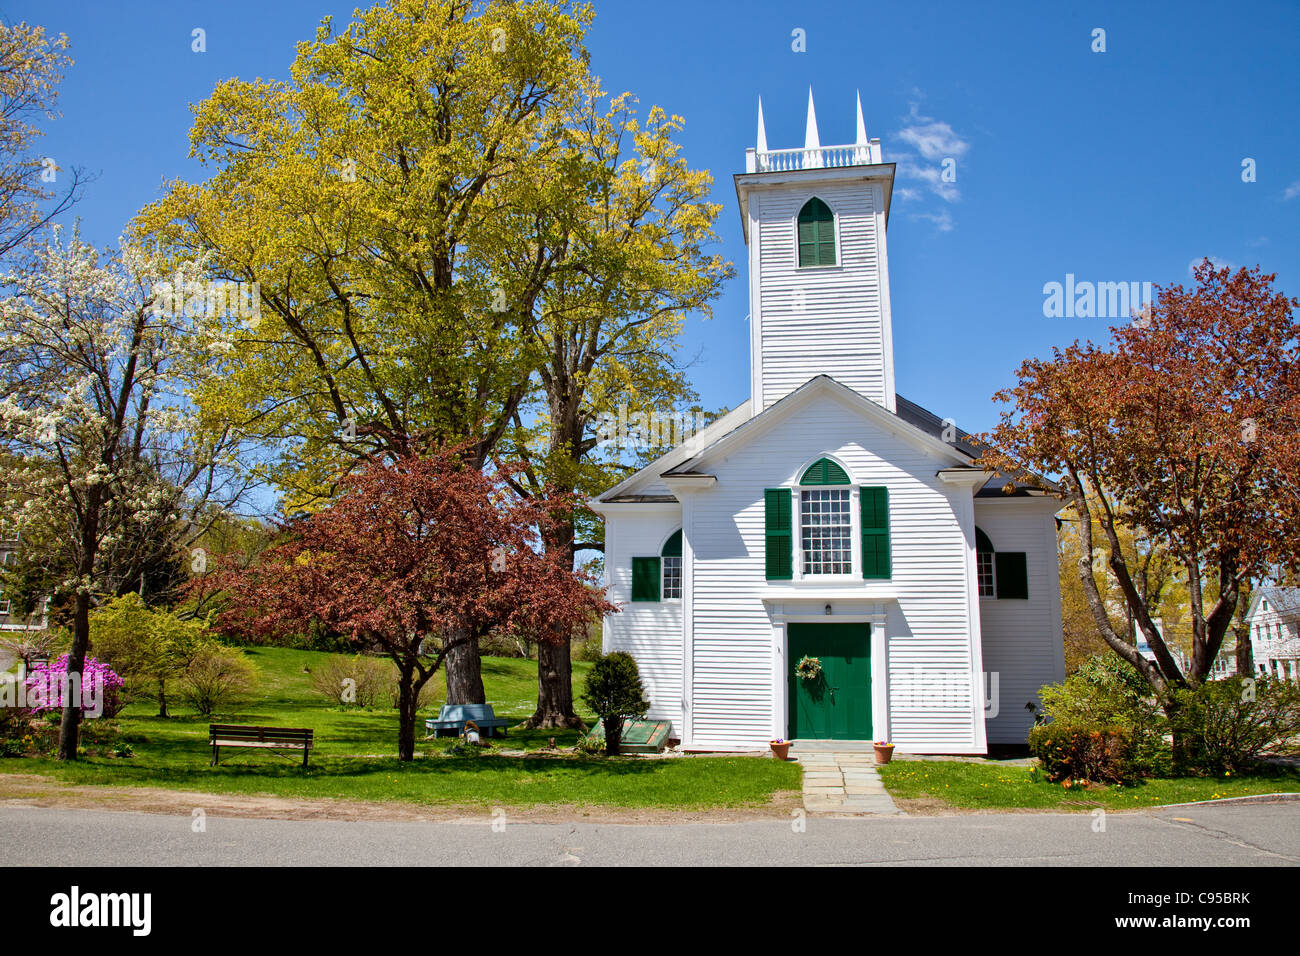 Spring time at St. John's Episcopal Church located in Ashfield, Massachusetts Stock Photo